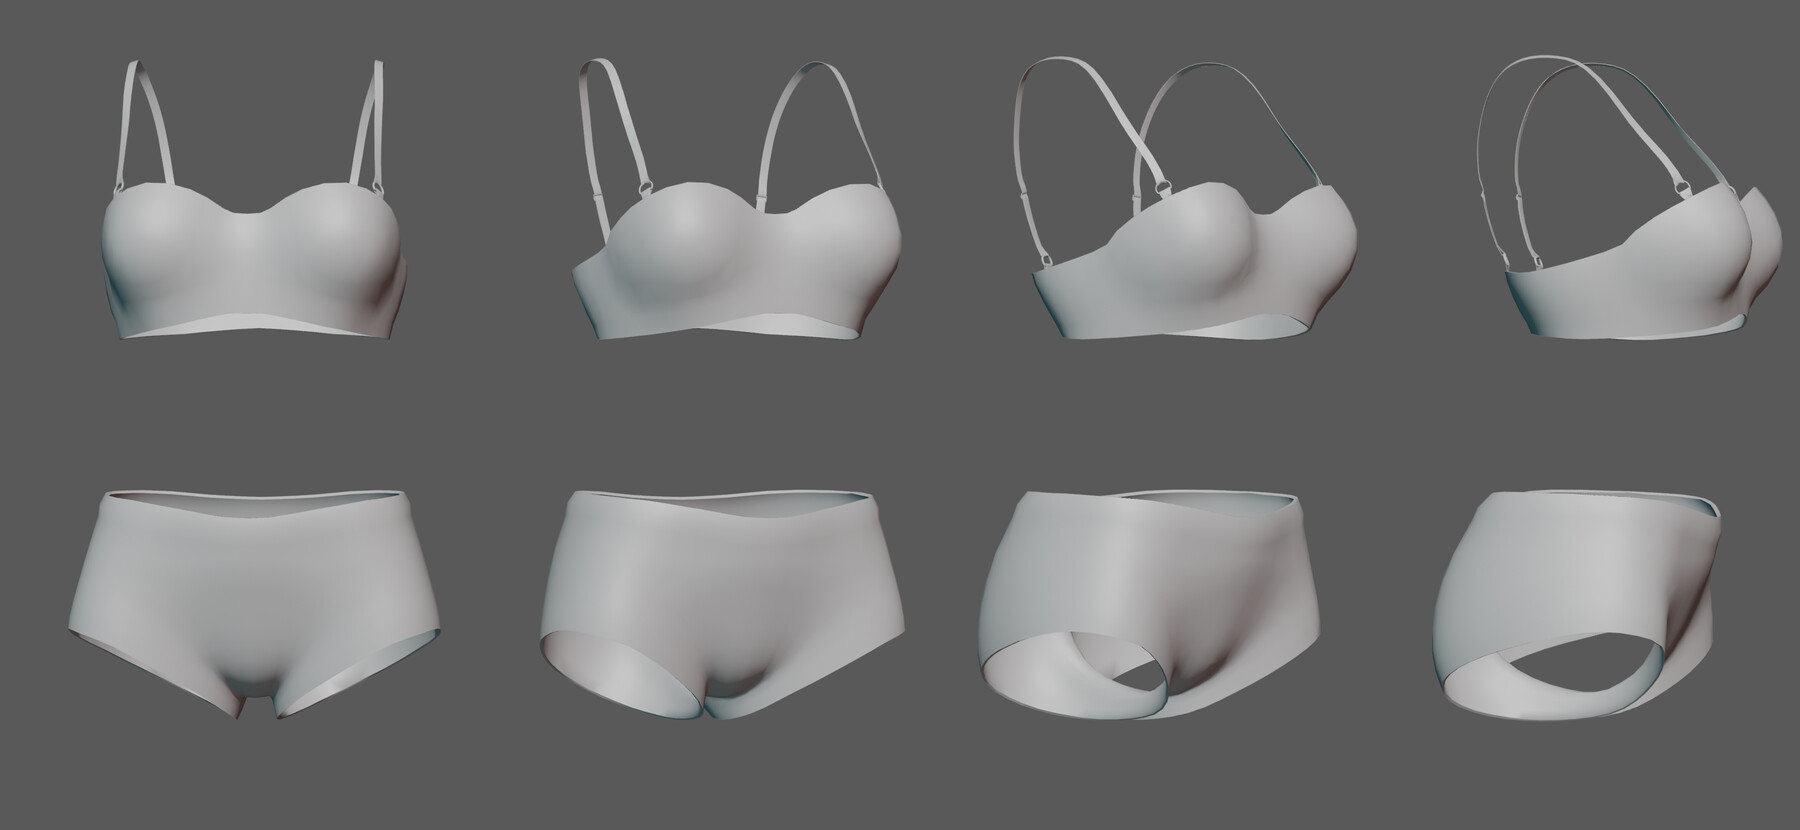 3D model Female Underwear Low-Poly Multiple colours VR / AR / low-poly